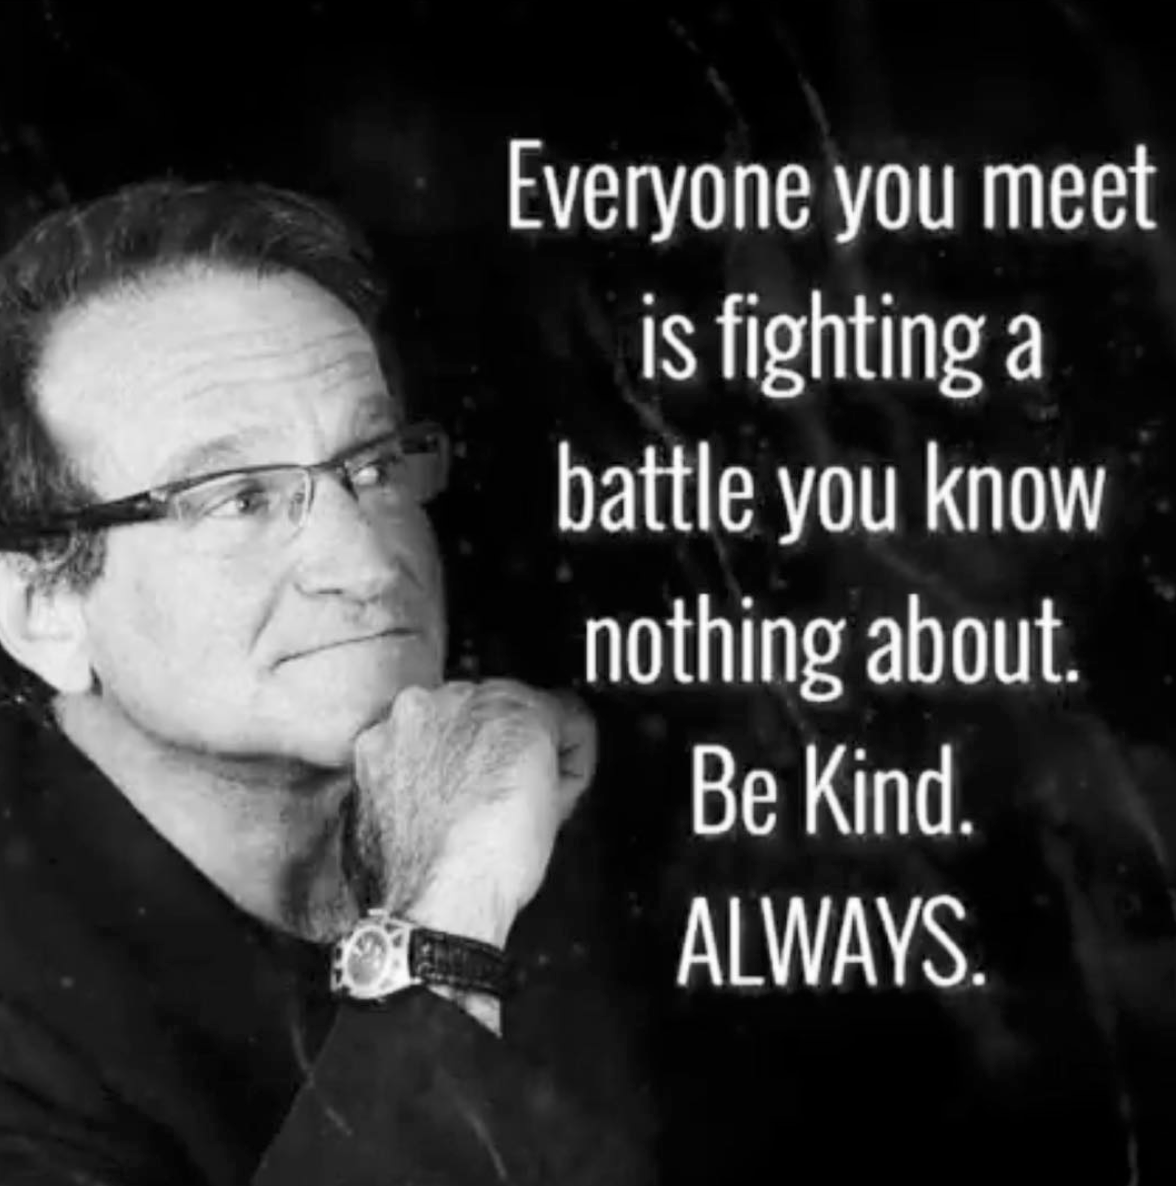 wholesome memes and pics - everyone struggles quotes - Everyone you meet is fighting a battle you know nothing about. Be Kind. Always.